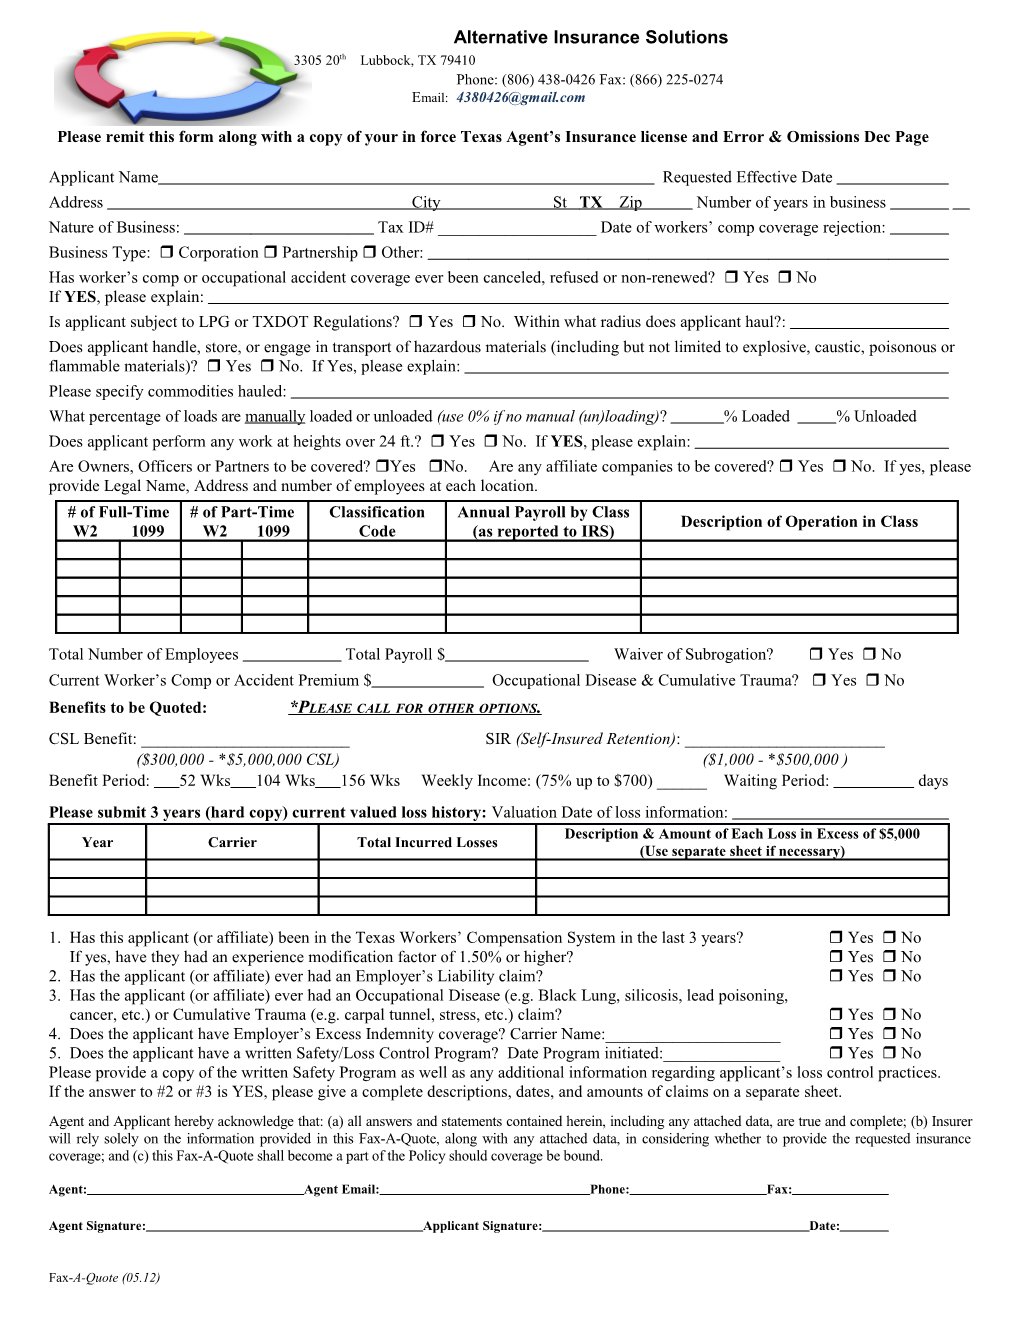 Please Remit This Form Along with a Copy of Your in Force Texas Agent S Insurance License